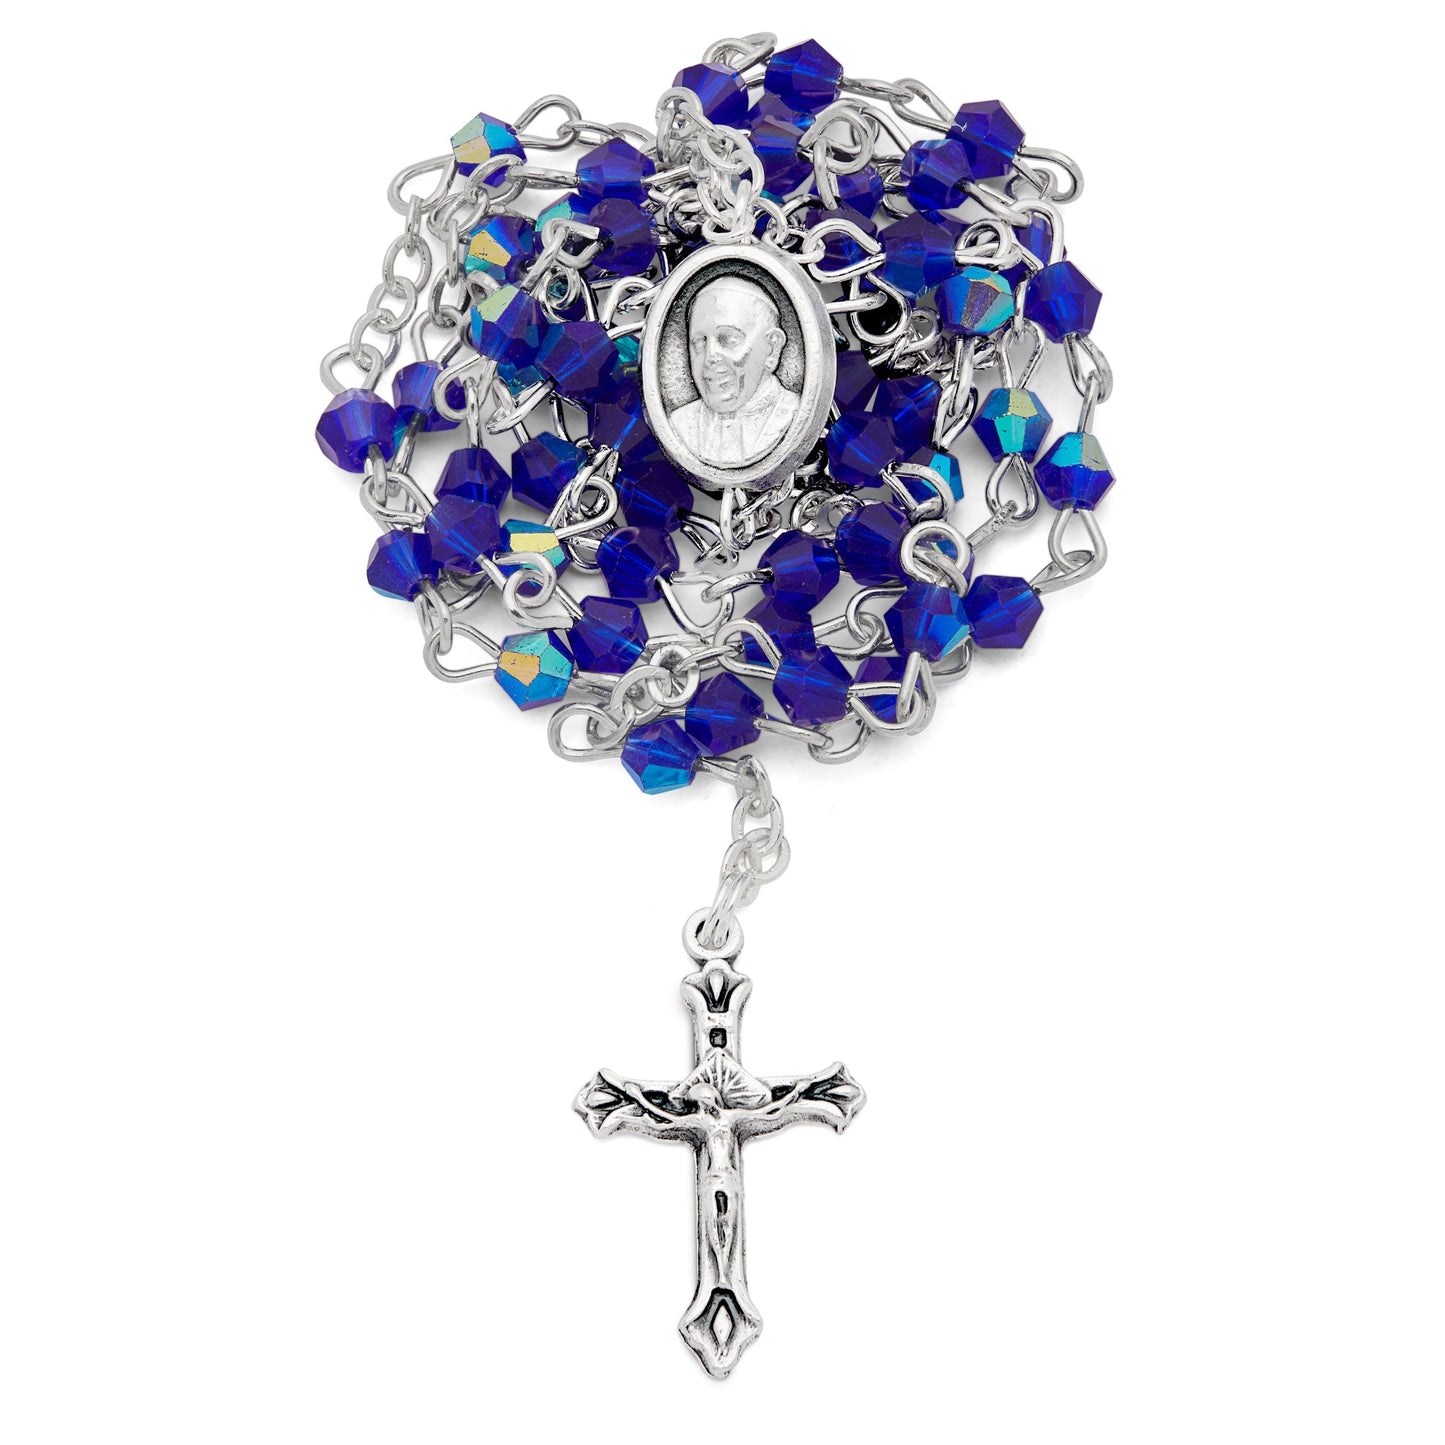 Mondo Cattolico Rosary Box 3.5x4 cm (1.38x1.57 in) / 3 mm (0.12 in) / 37.5 cm (14.76 in) Small Blue Enameled Holy Spirit Rosary Case With Blue Crystal Rosary